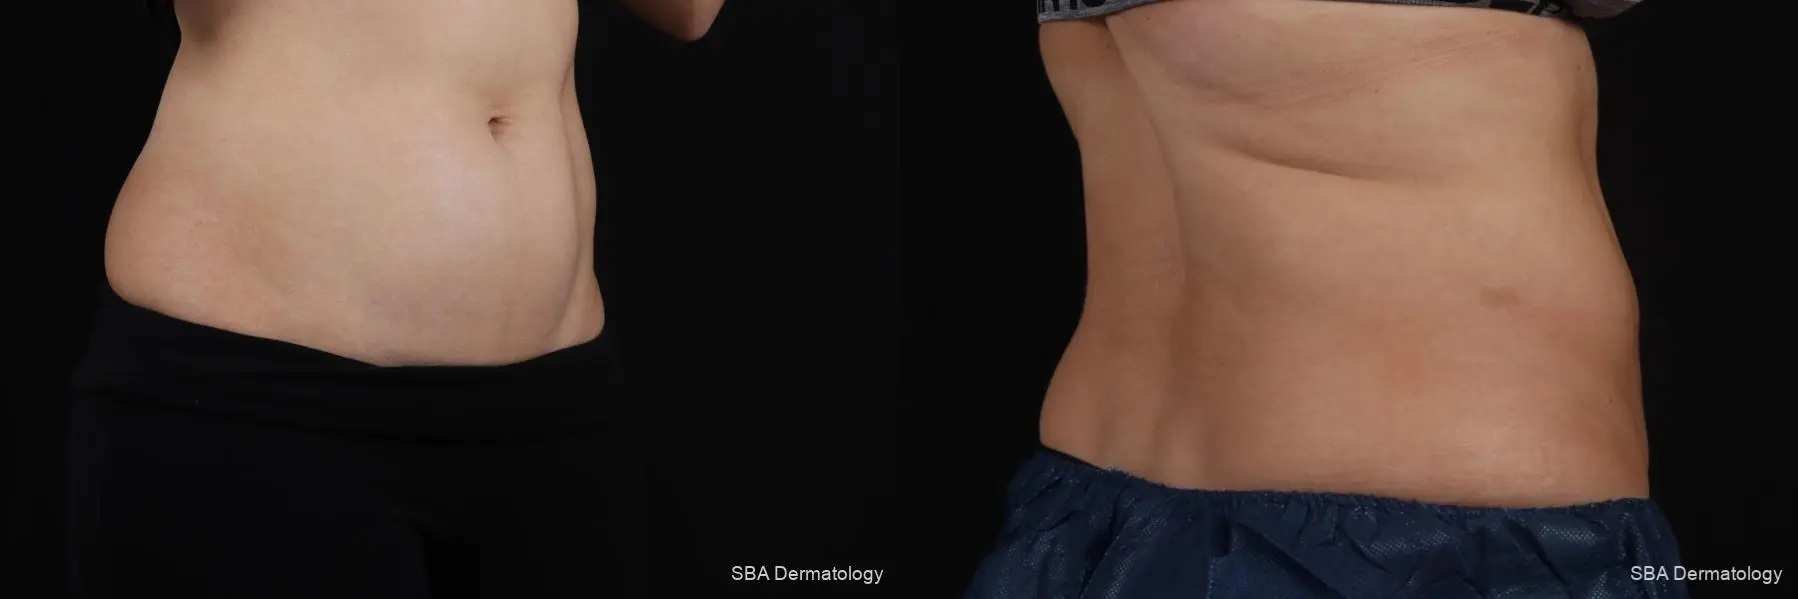 Coolsculpting: Patient 6 - Before and After 6